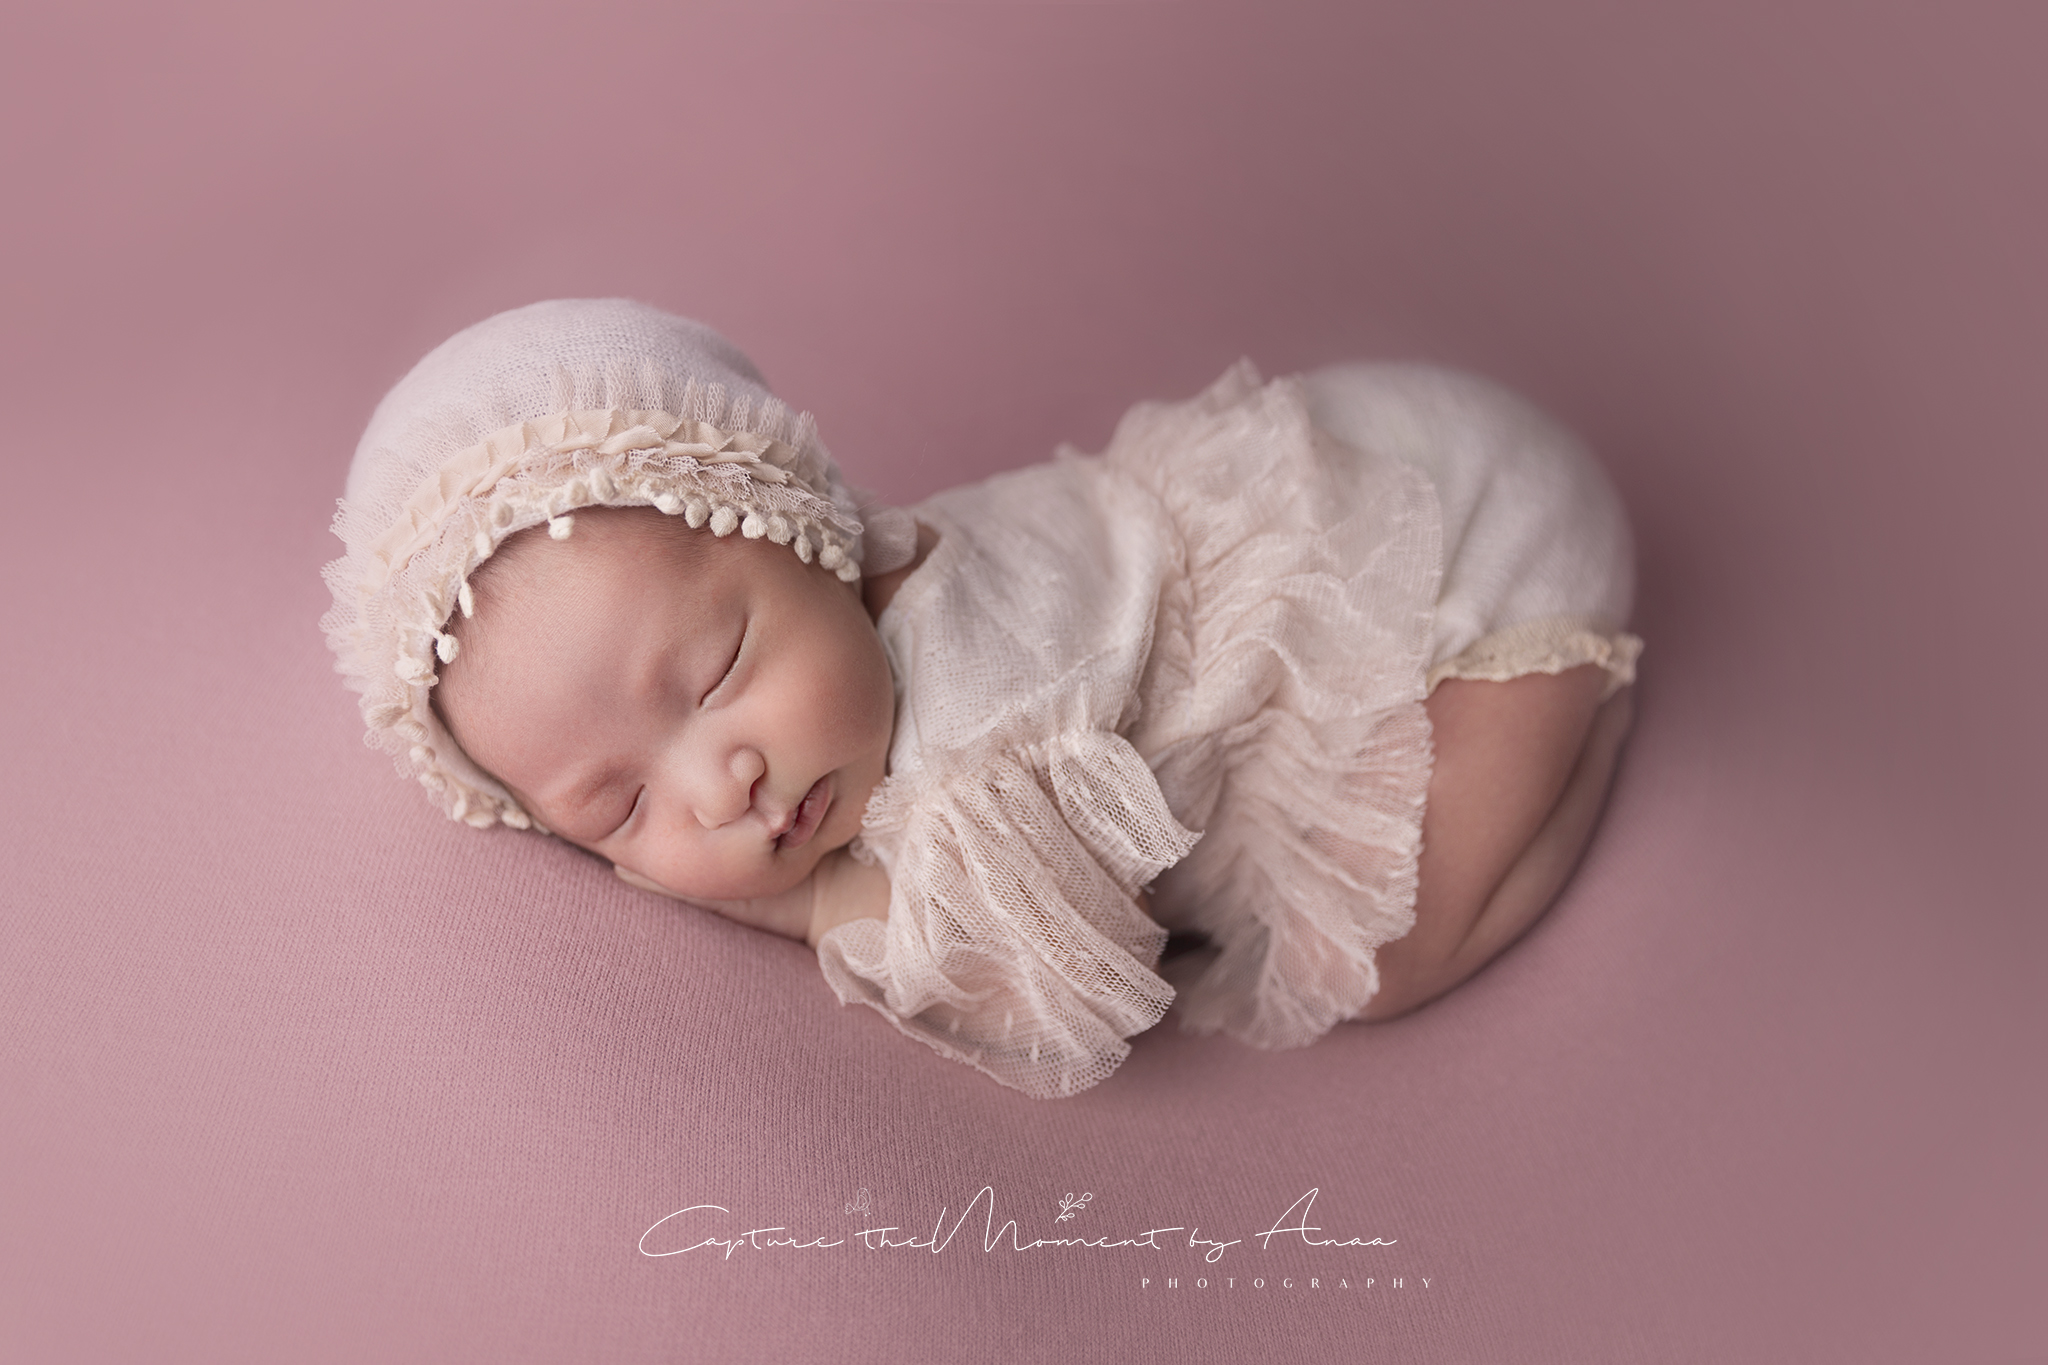 How to Take a Newborn Baby Photography? | Handleforme